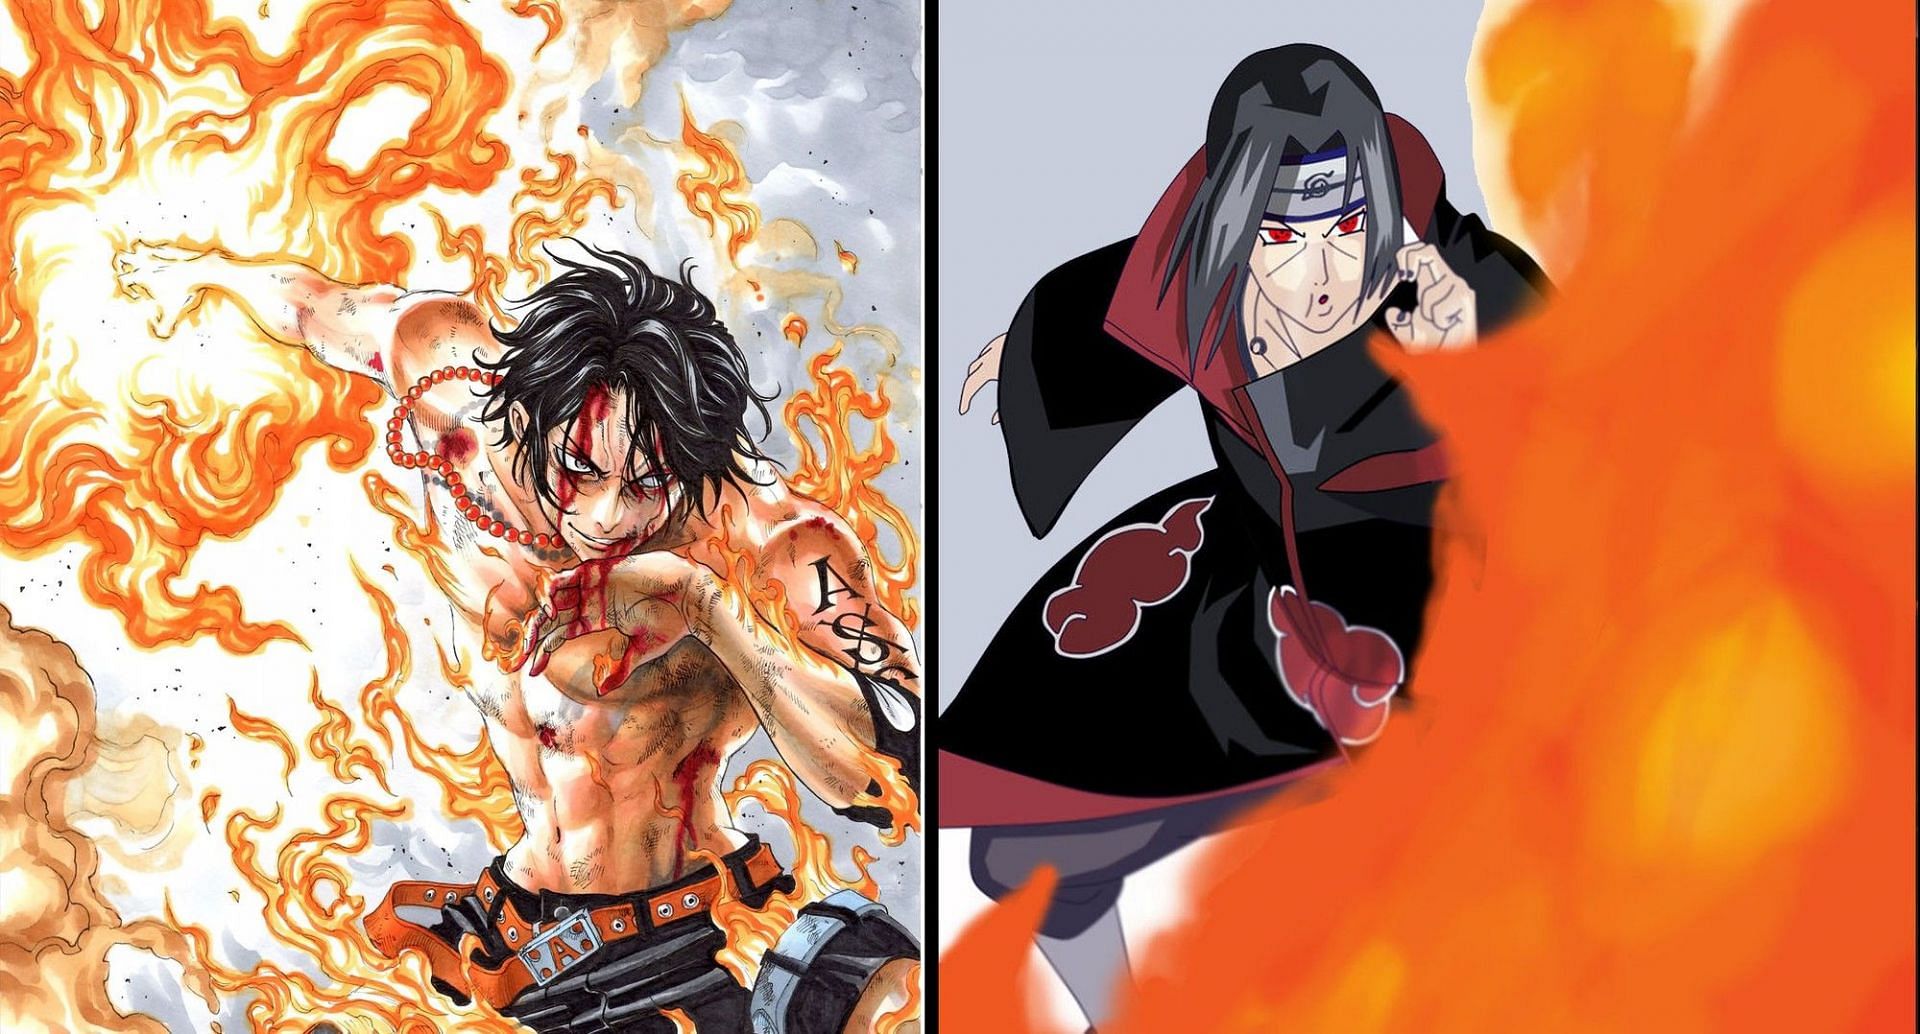 ANIME FIRE USER VS EACH OTHER #fire #depate #anime #edit #fyp #onepiec